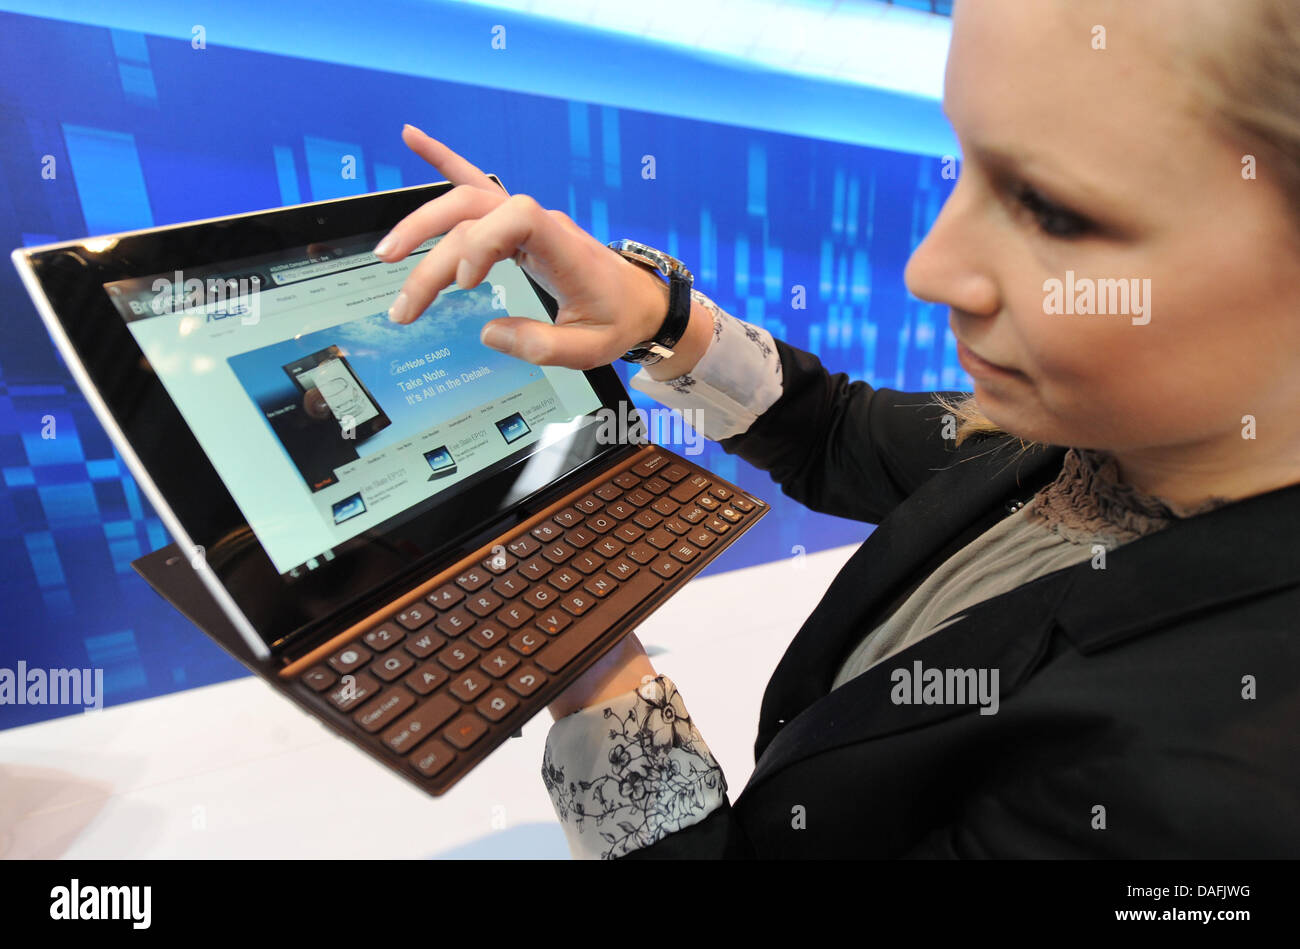 An employee of ASUS presents an ASUS Tablet Slice 10.1 inch computer with extensible keyboard during the construction of the CeBIT media showcase for computing technology on the tradeshow ground in Hanover, Germany, 28 February 2011. Cebit will present over 4200 companies from about 70 countries during the Cebit trade showcasing from 1 until 5 March 2011. this year's partner countr Stock Photo